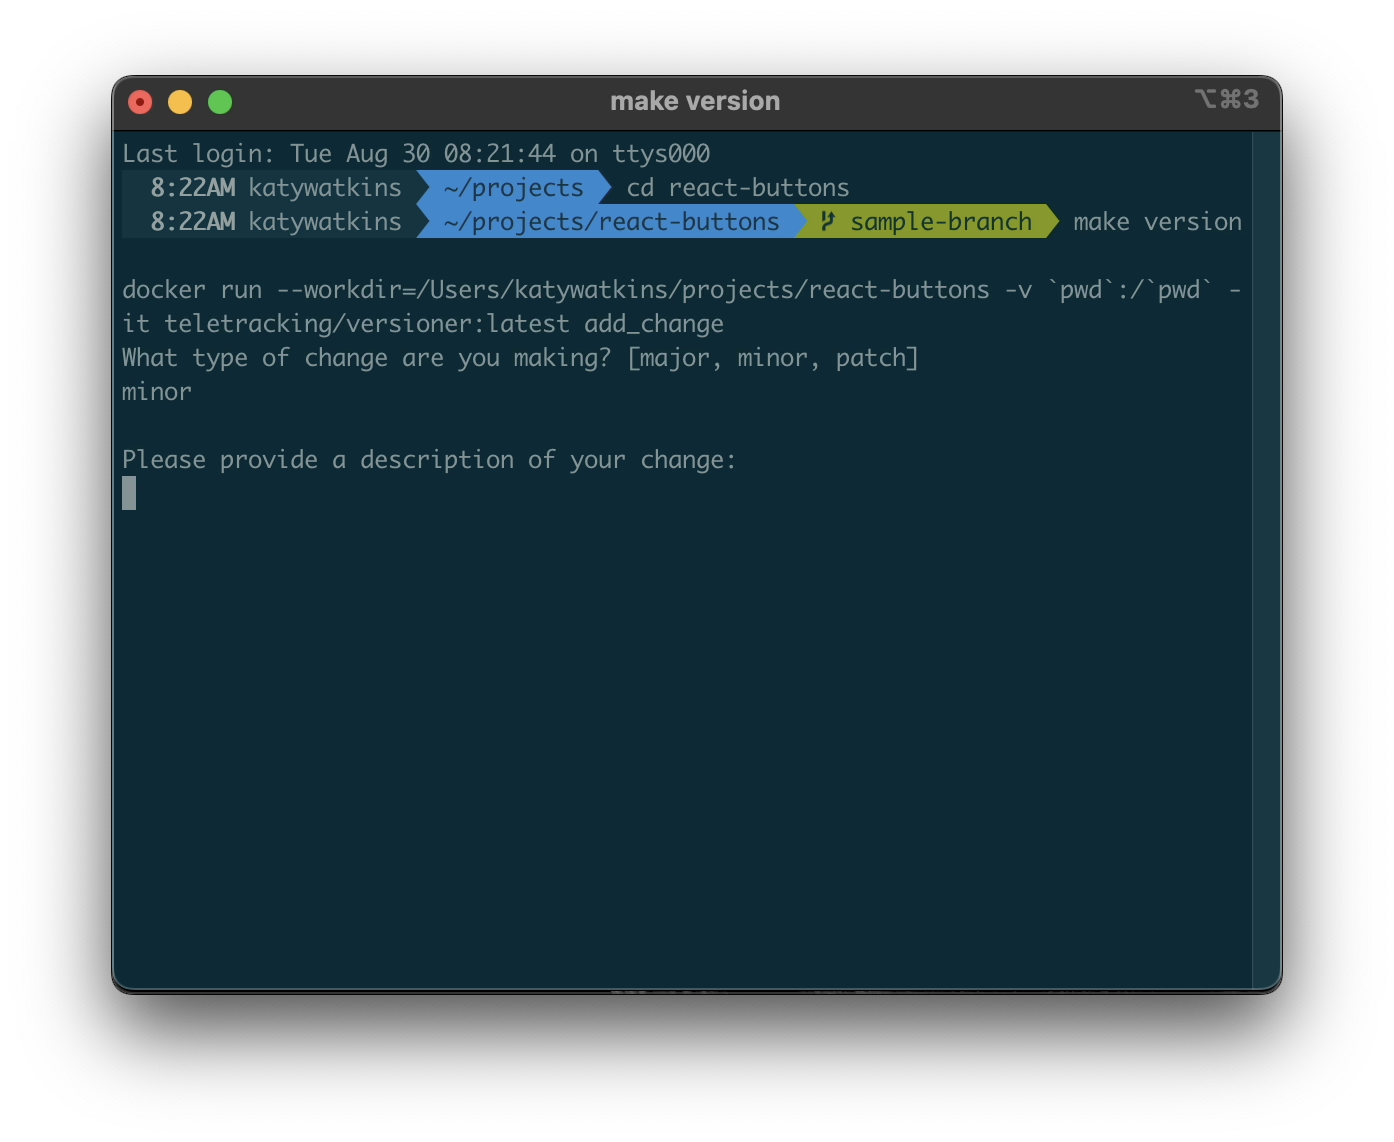 Screenshot of the terminal prompting the user for a version type (major, minor, or patch) and a description of the changes